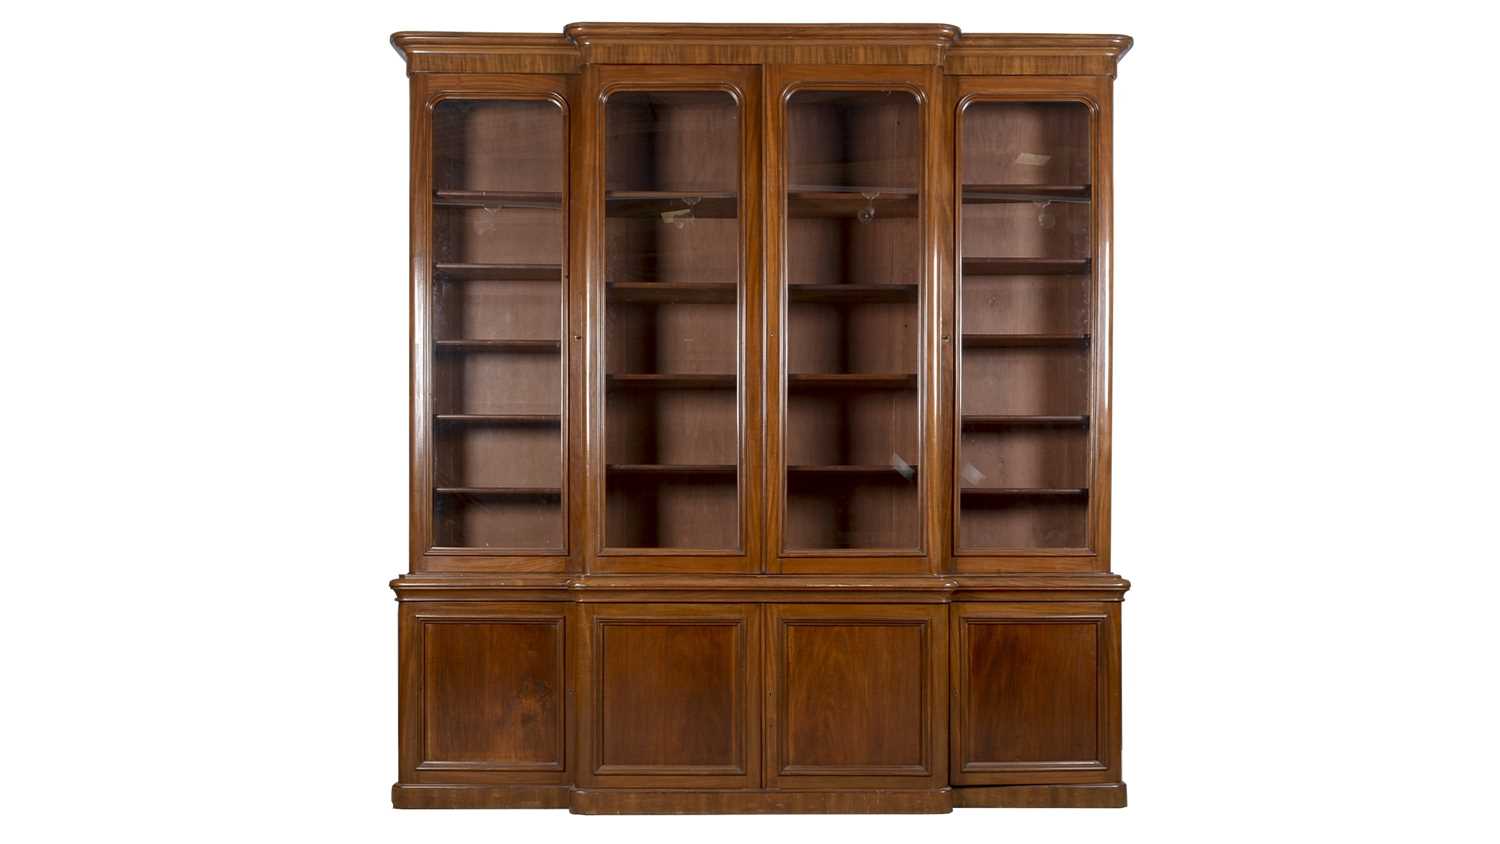 Lot 1423 - A large late 19th Century mahogany breakfront library bookcase